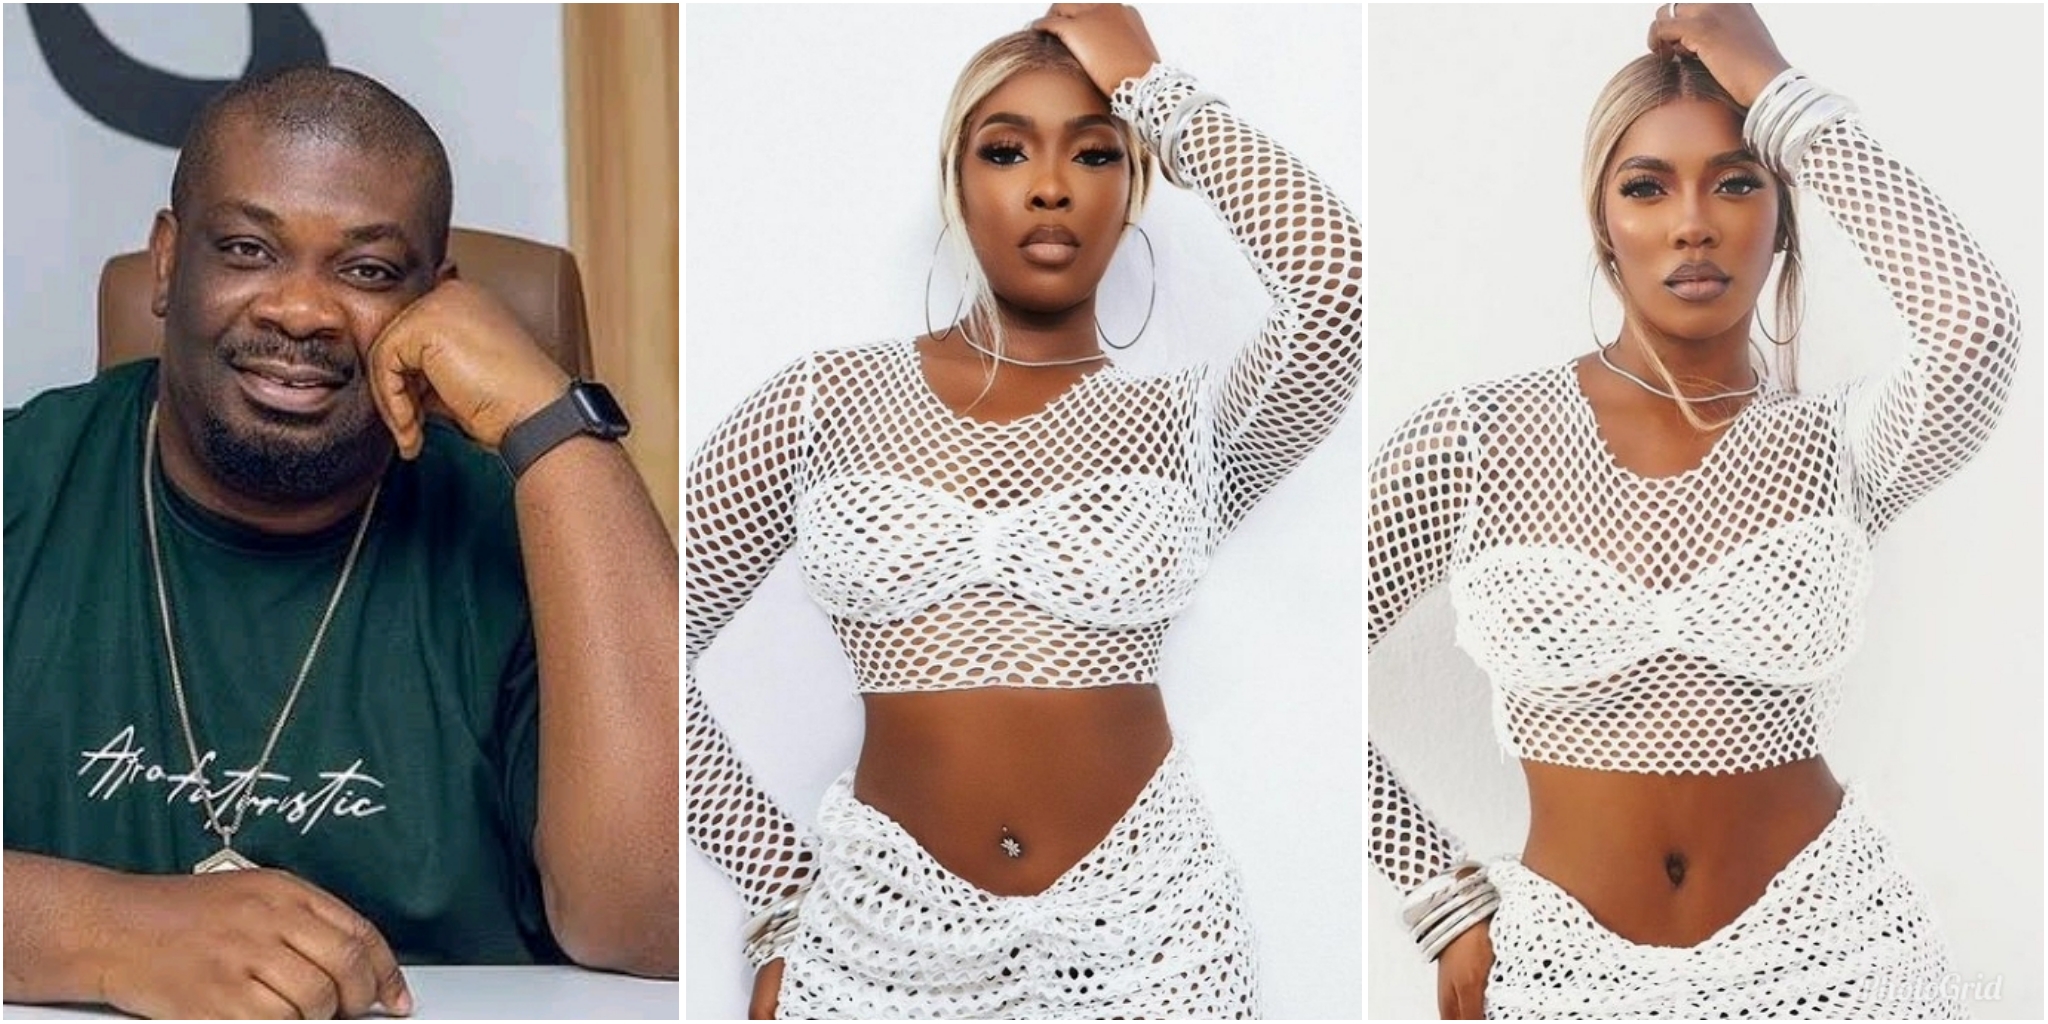 Viral photos of Tiwa Savage and singer’s look-alike donning matching outfit leaves Don Jazzy stunned